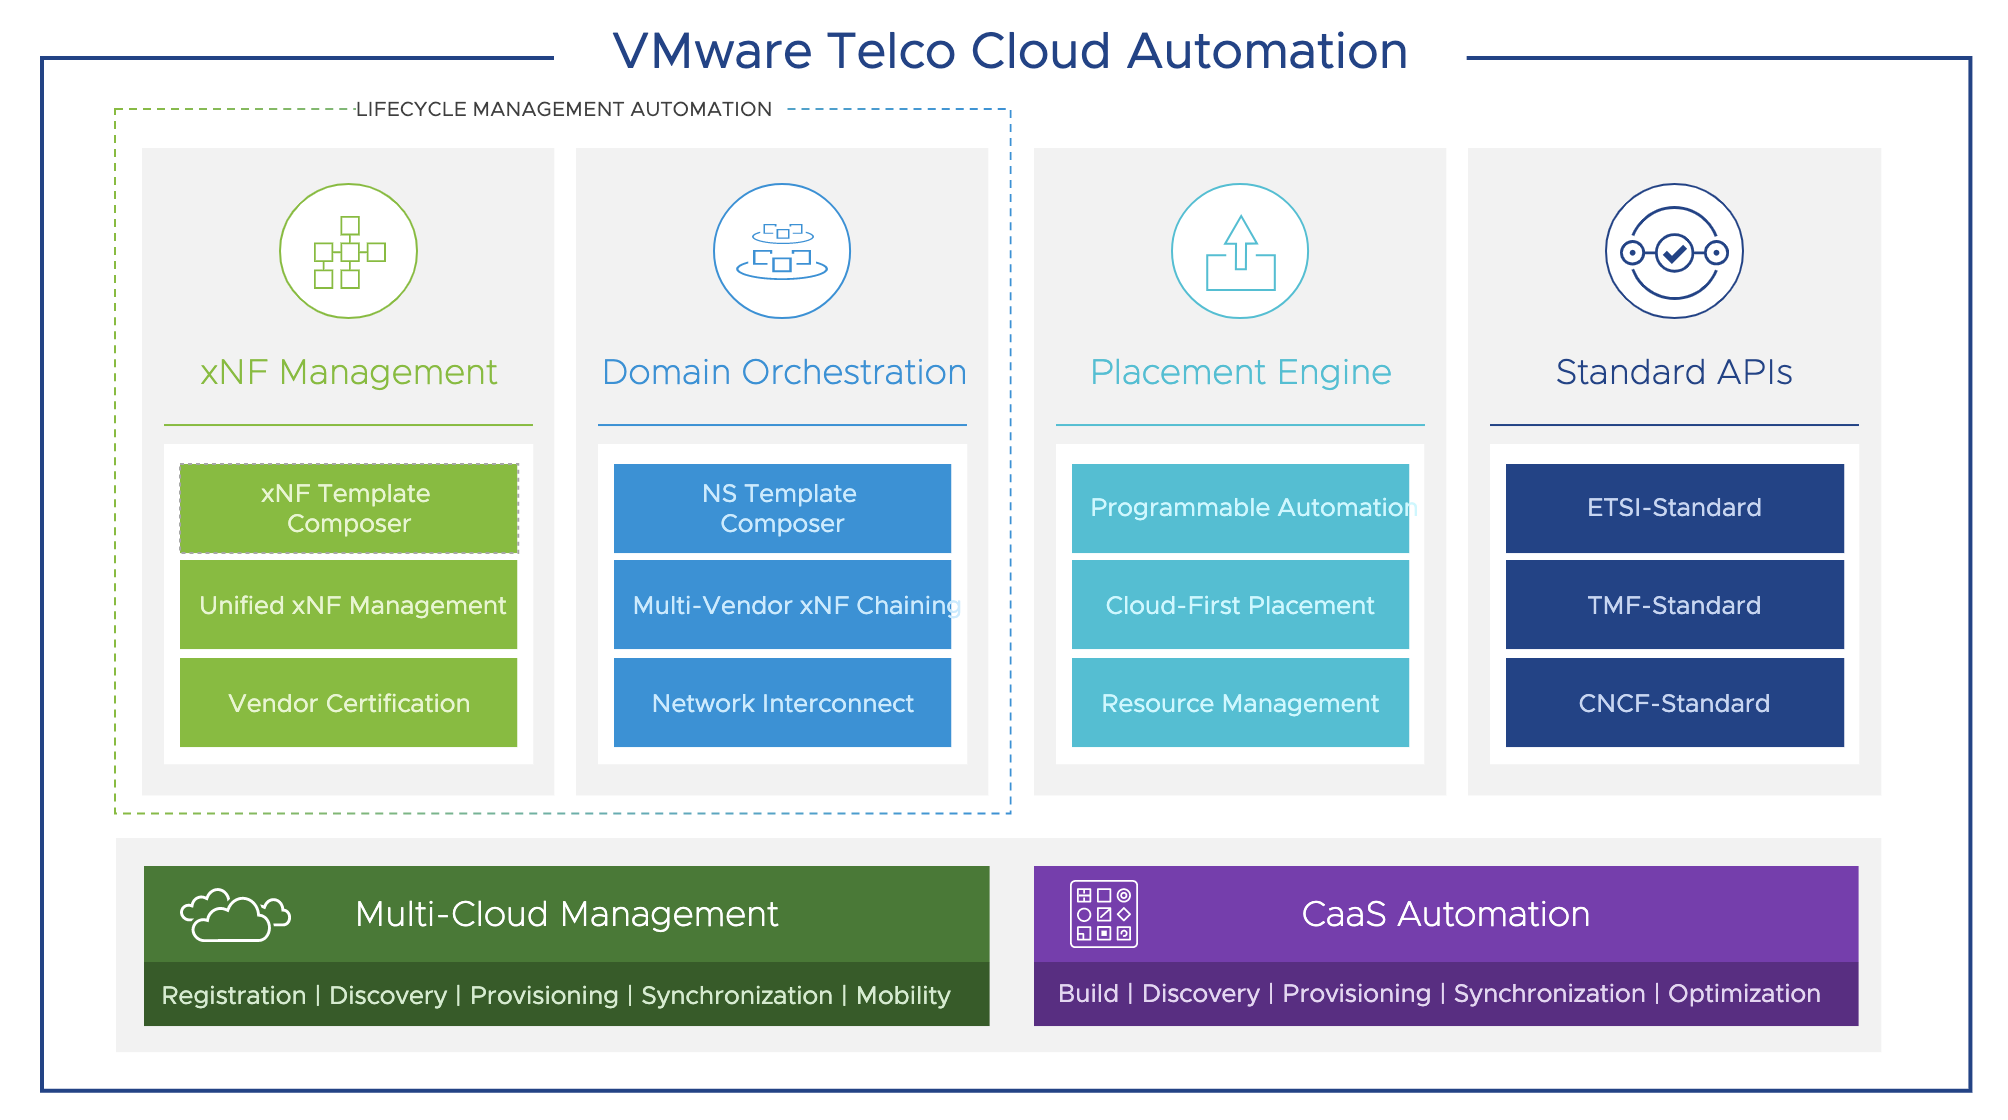 Telco Cloud Automation